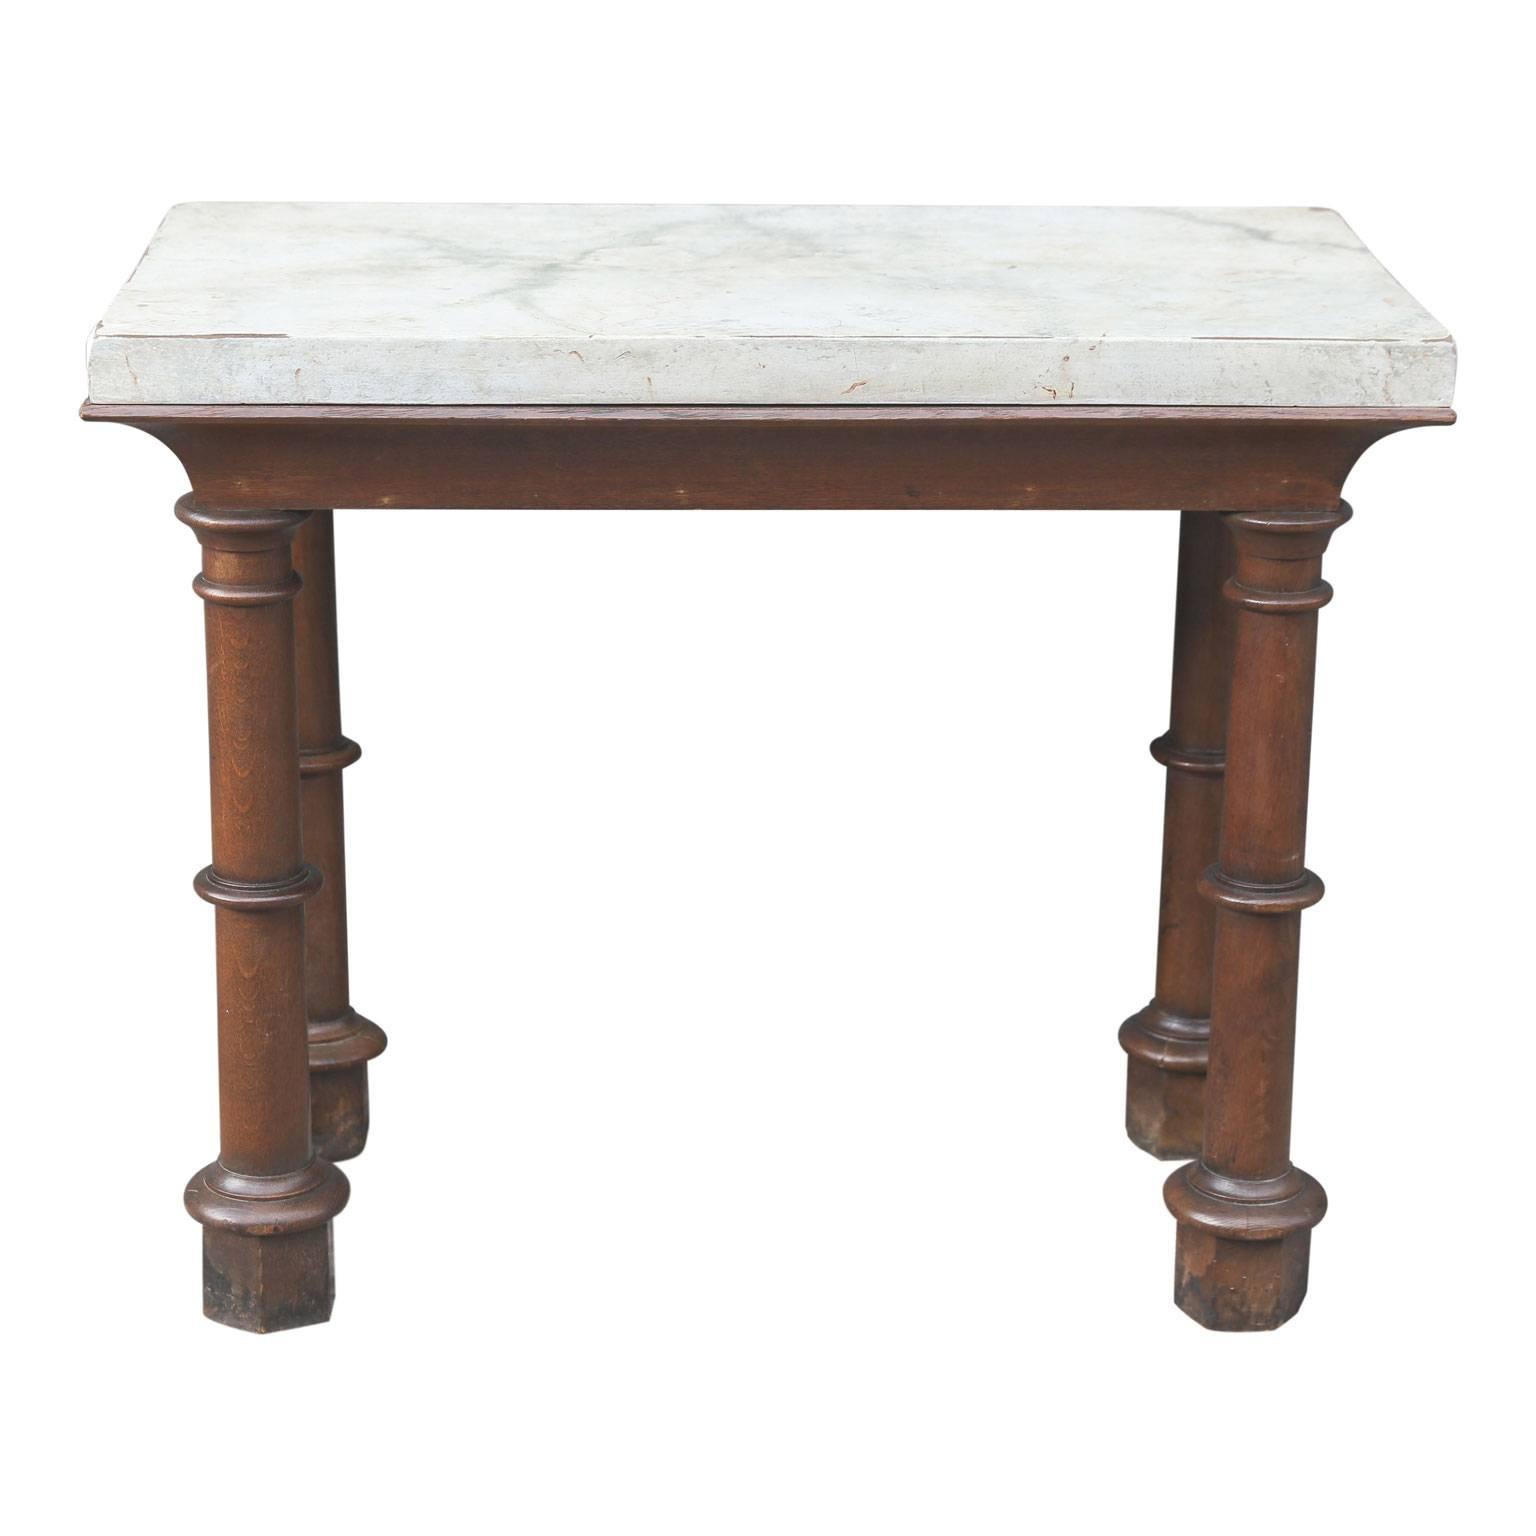 Faux Carrara marble-top oak two-sided console, an unusual and handsome 19th century console table from England, finished on all four sides (perfect to float away from a wall). A beautifully executed faux marble thick single plank top supported by a